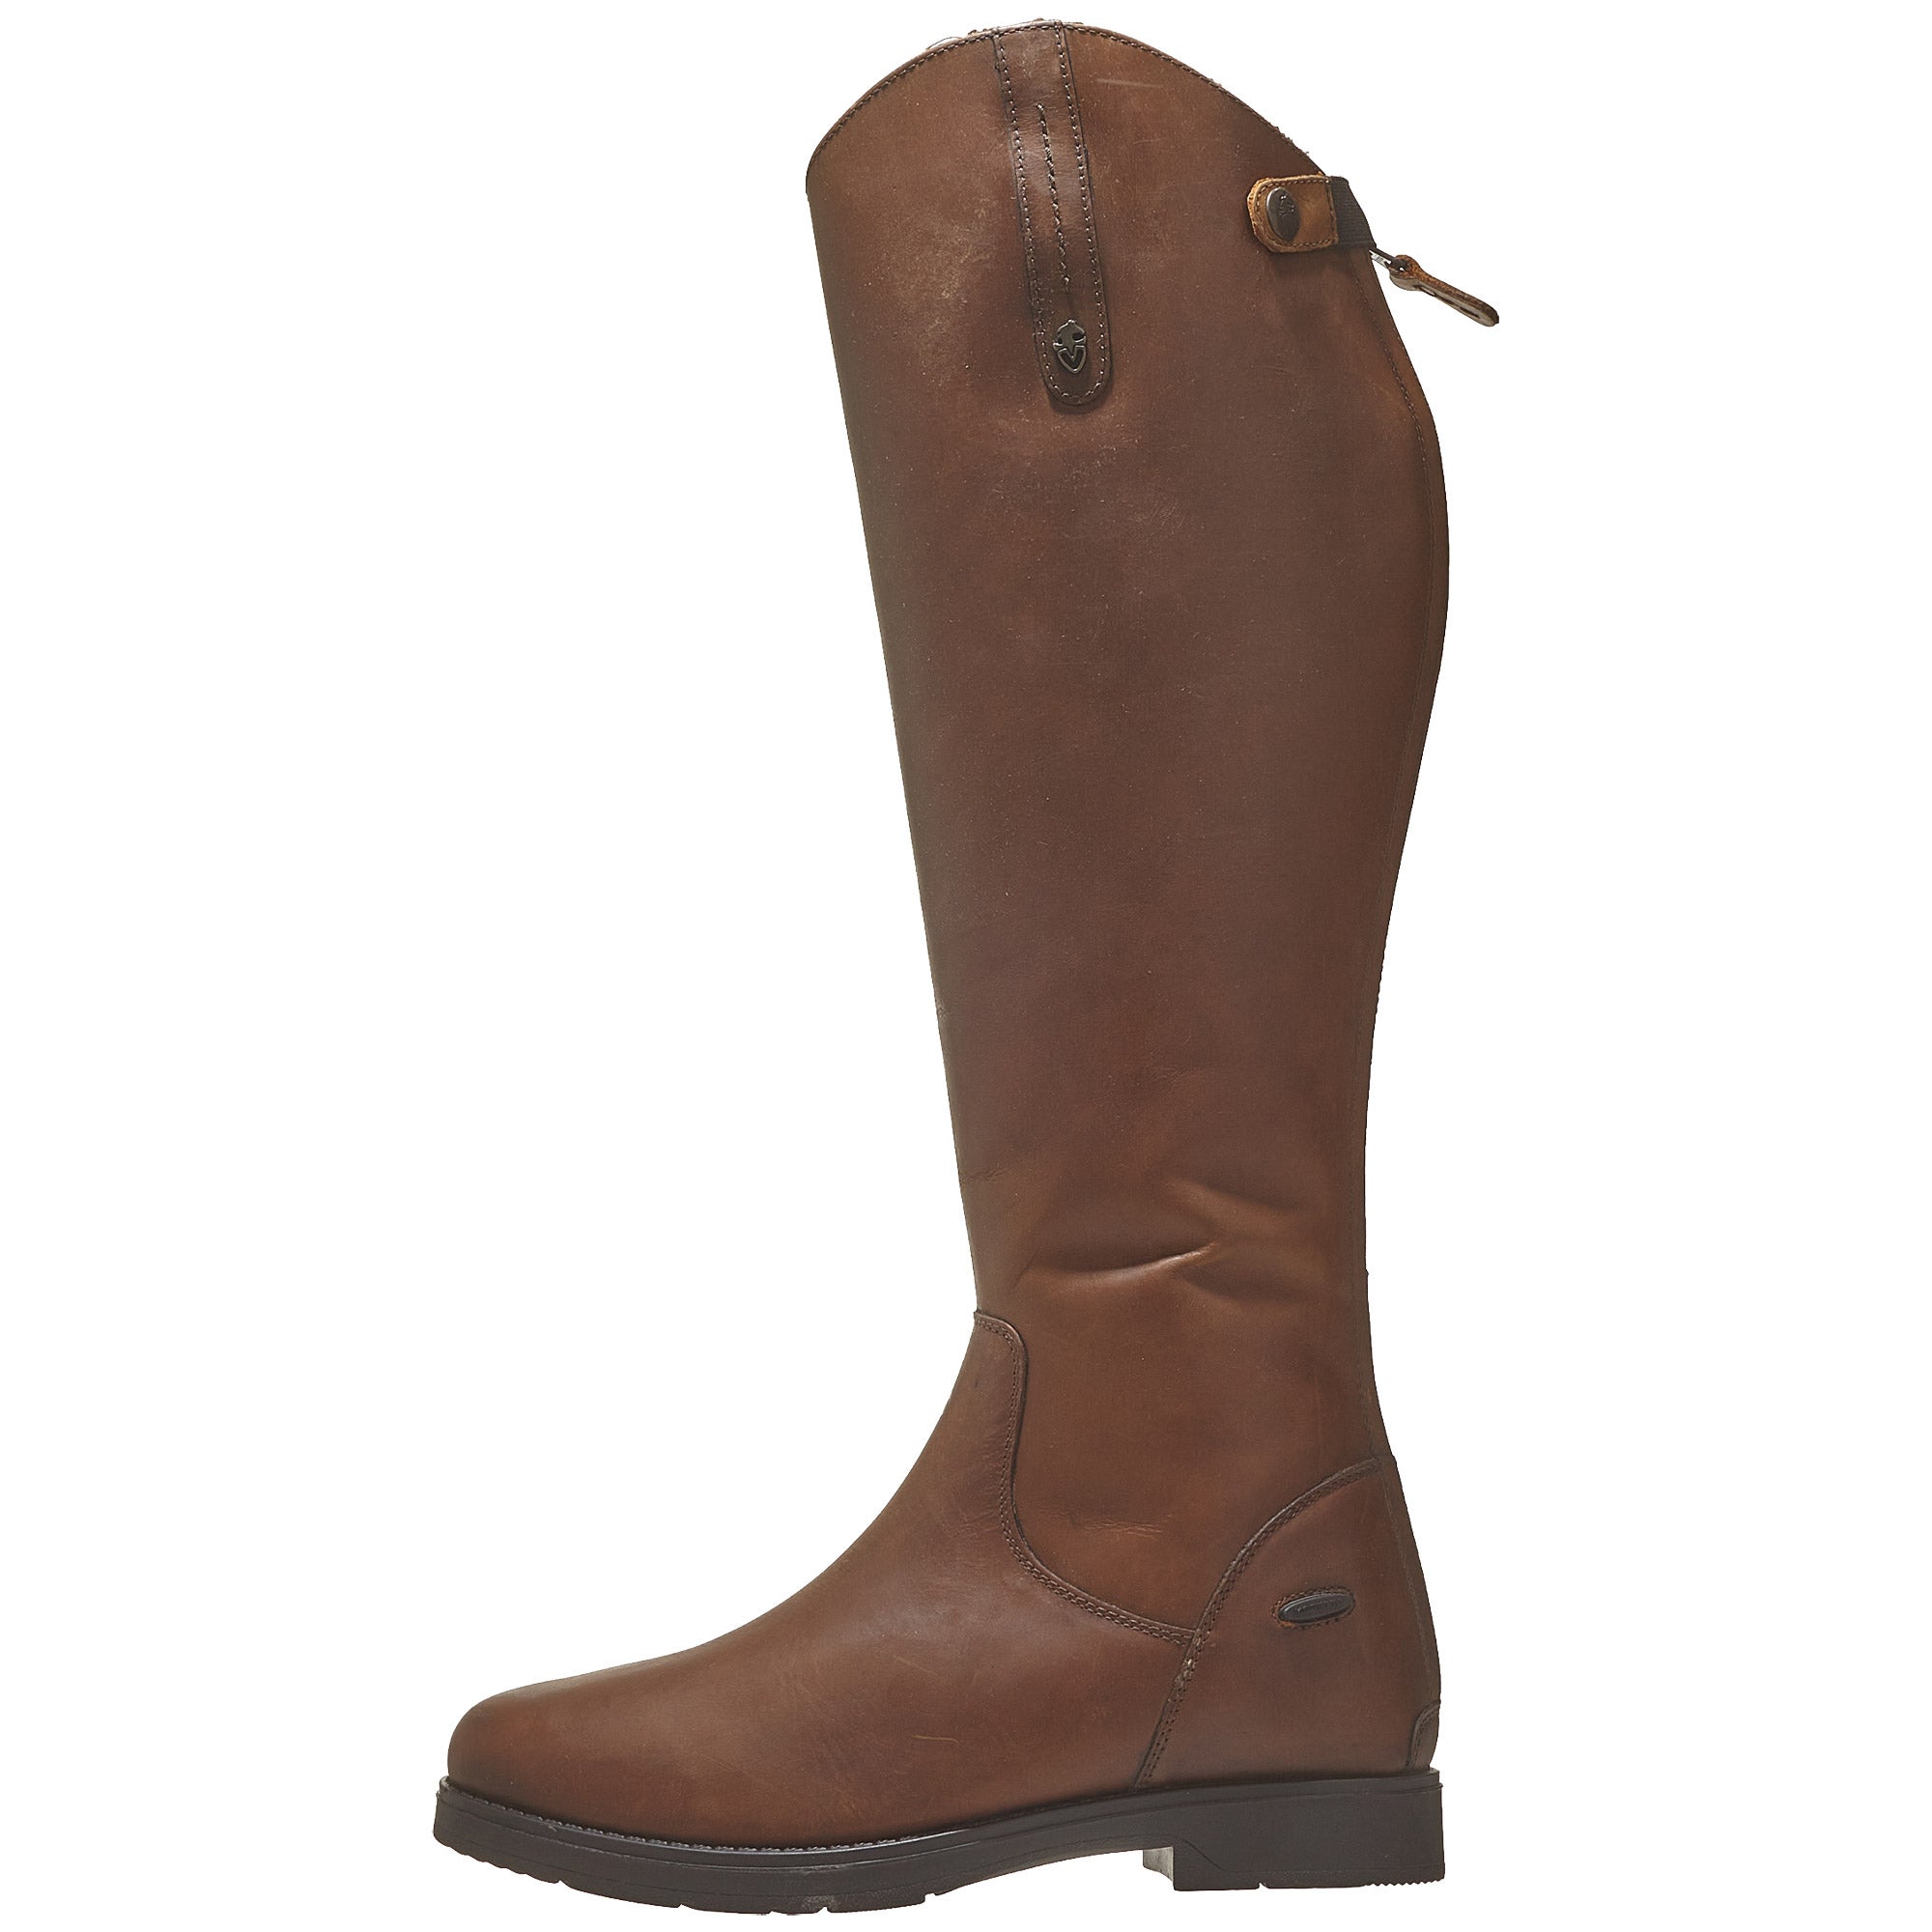 Shires Moretta Teo Long Boots Brown 6/39W 